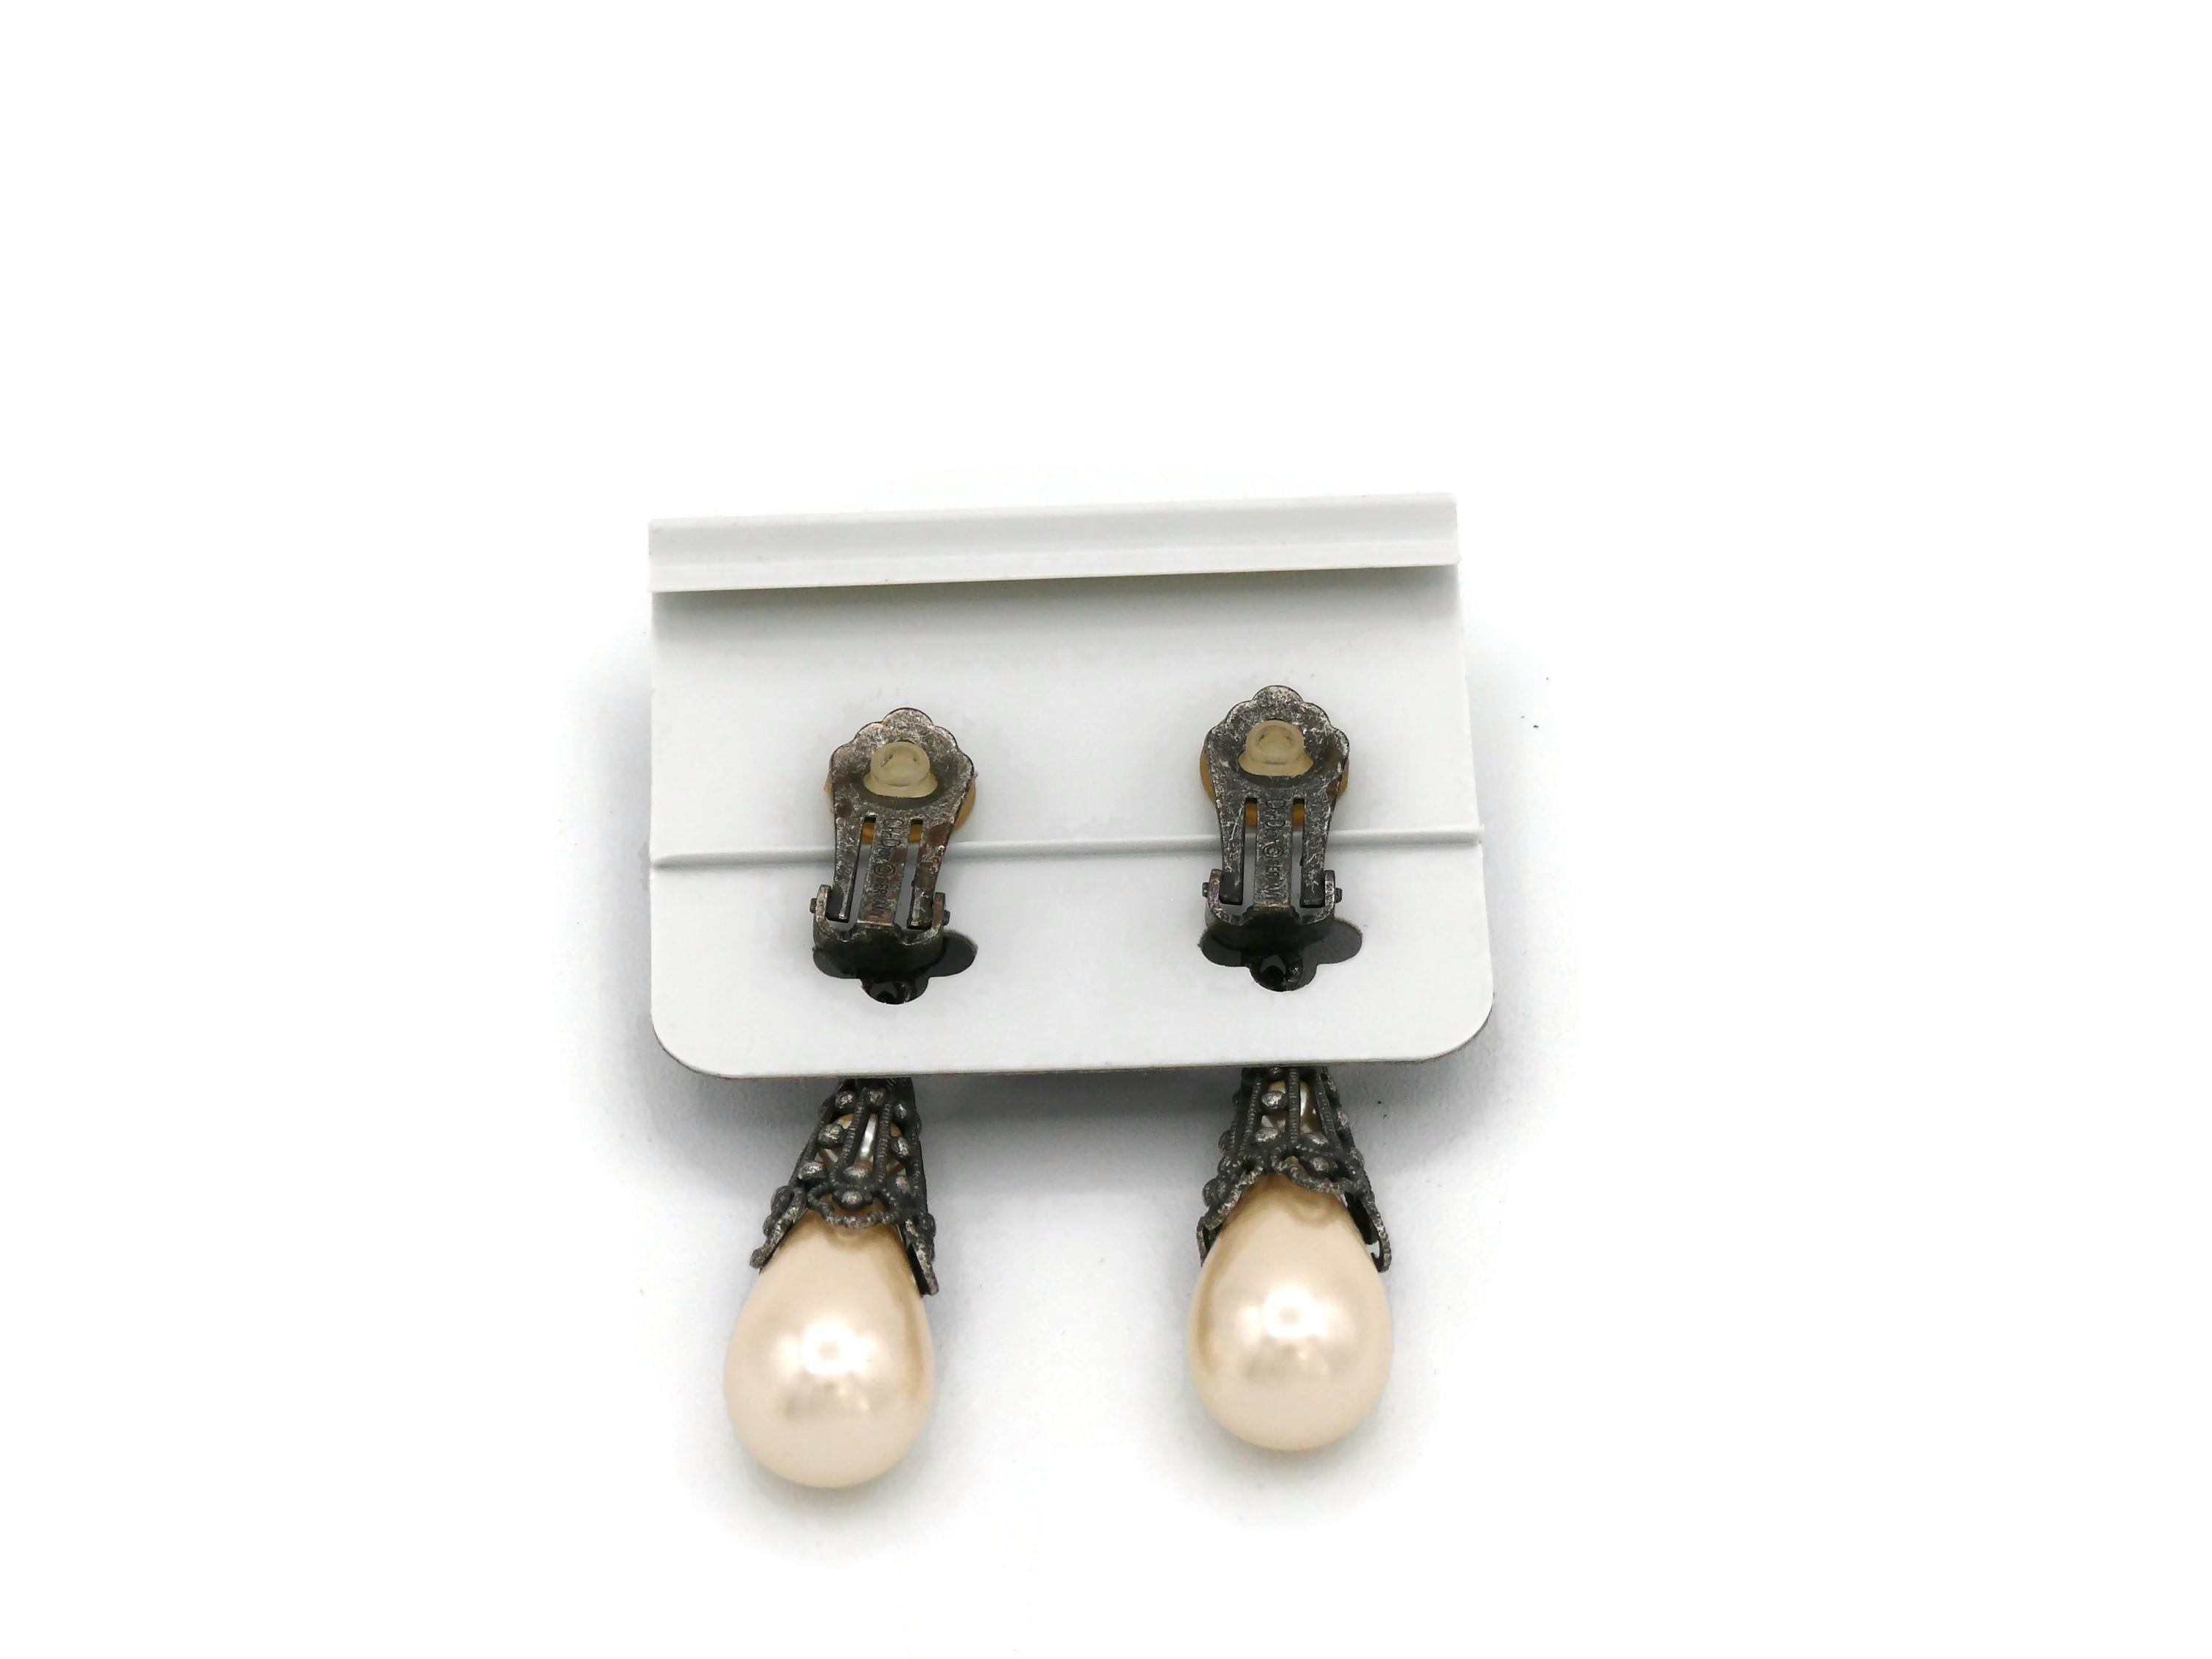 CHRISTIAN DIOR Vintage Victorian Insipred Faux Pearl Dangling Earrings For Sale 3